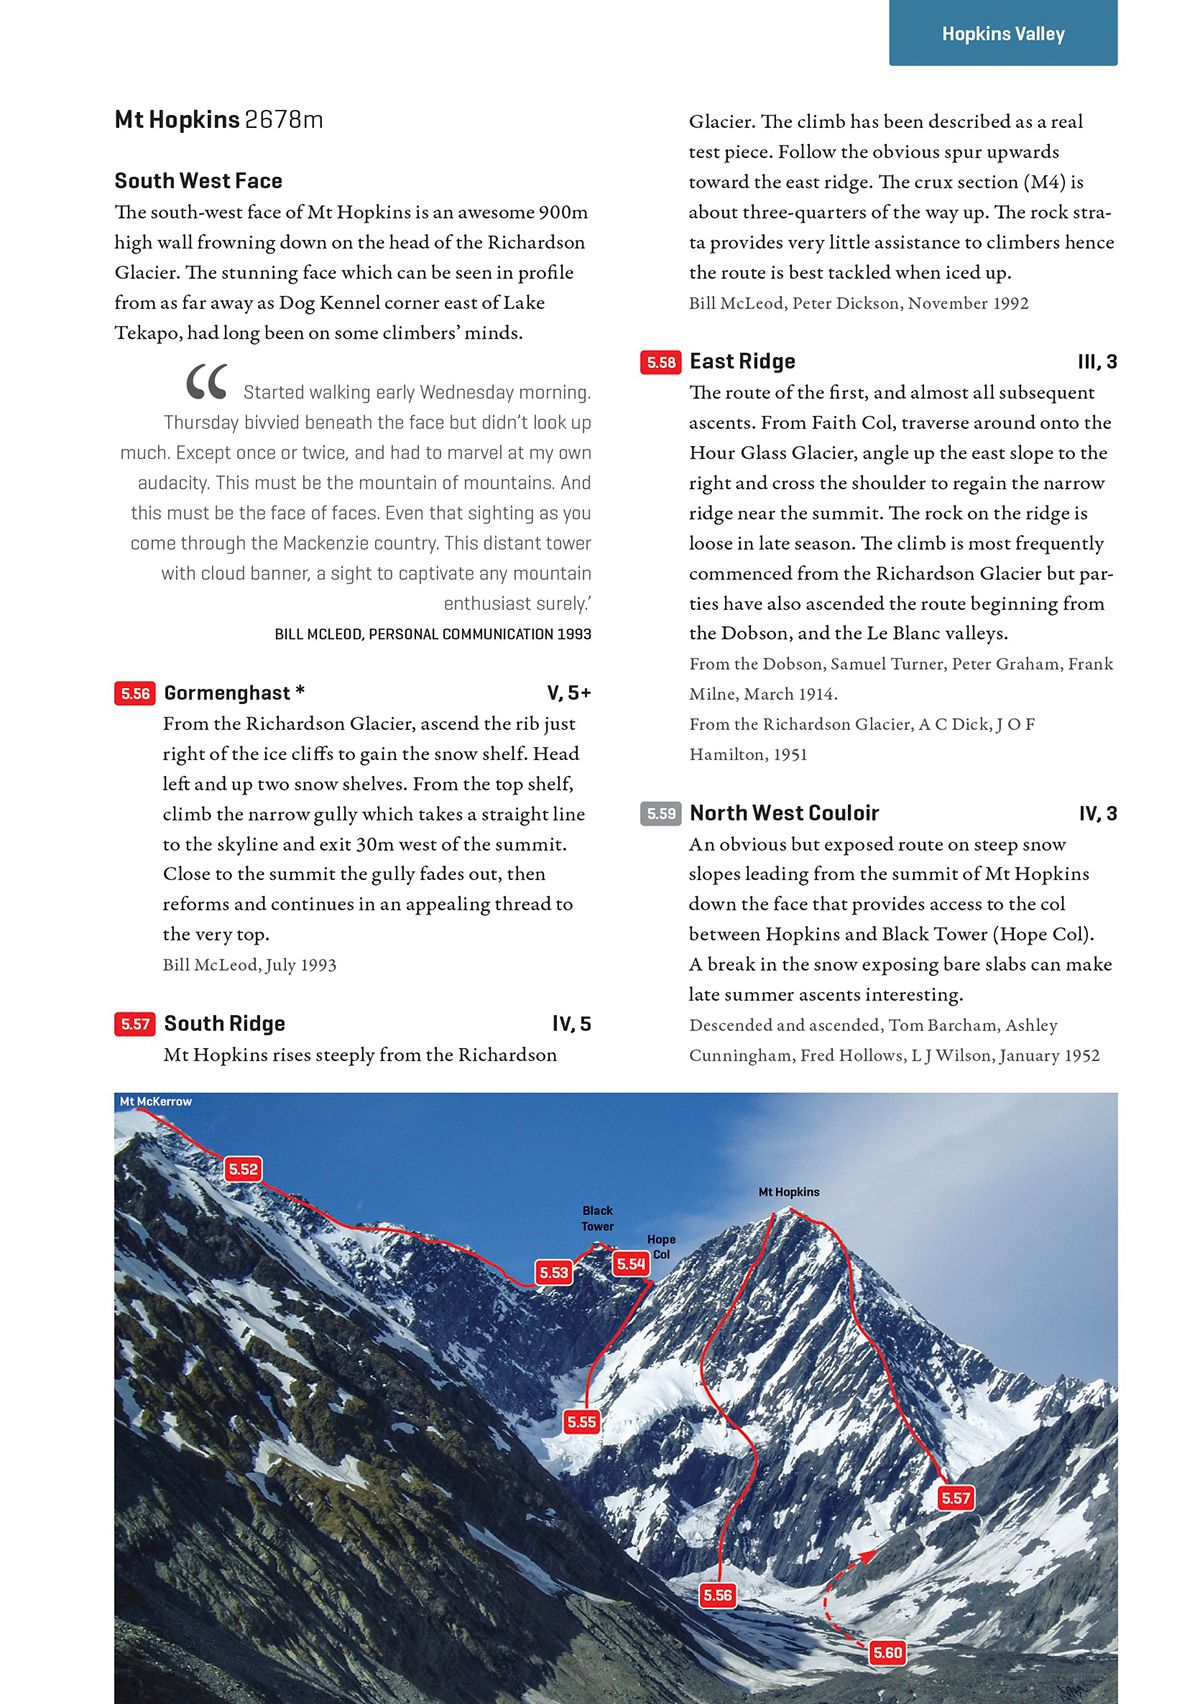 Sample page from guidebook